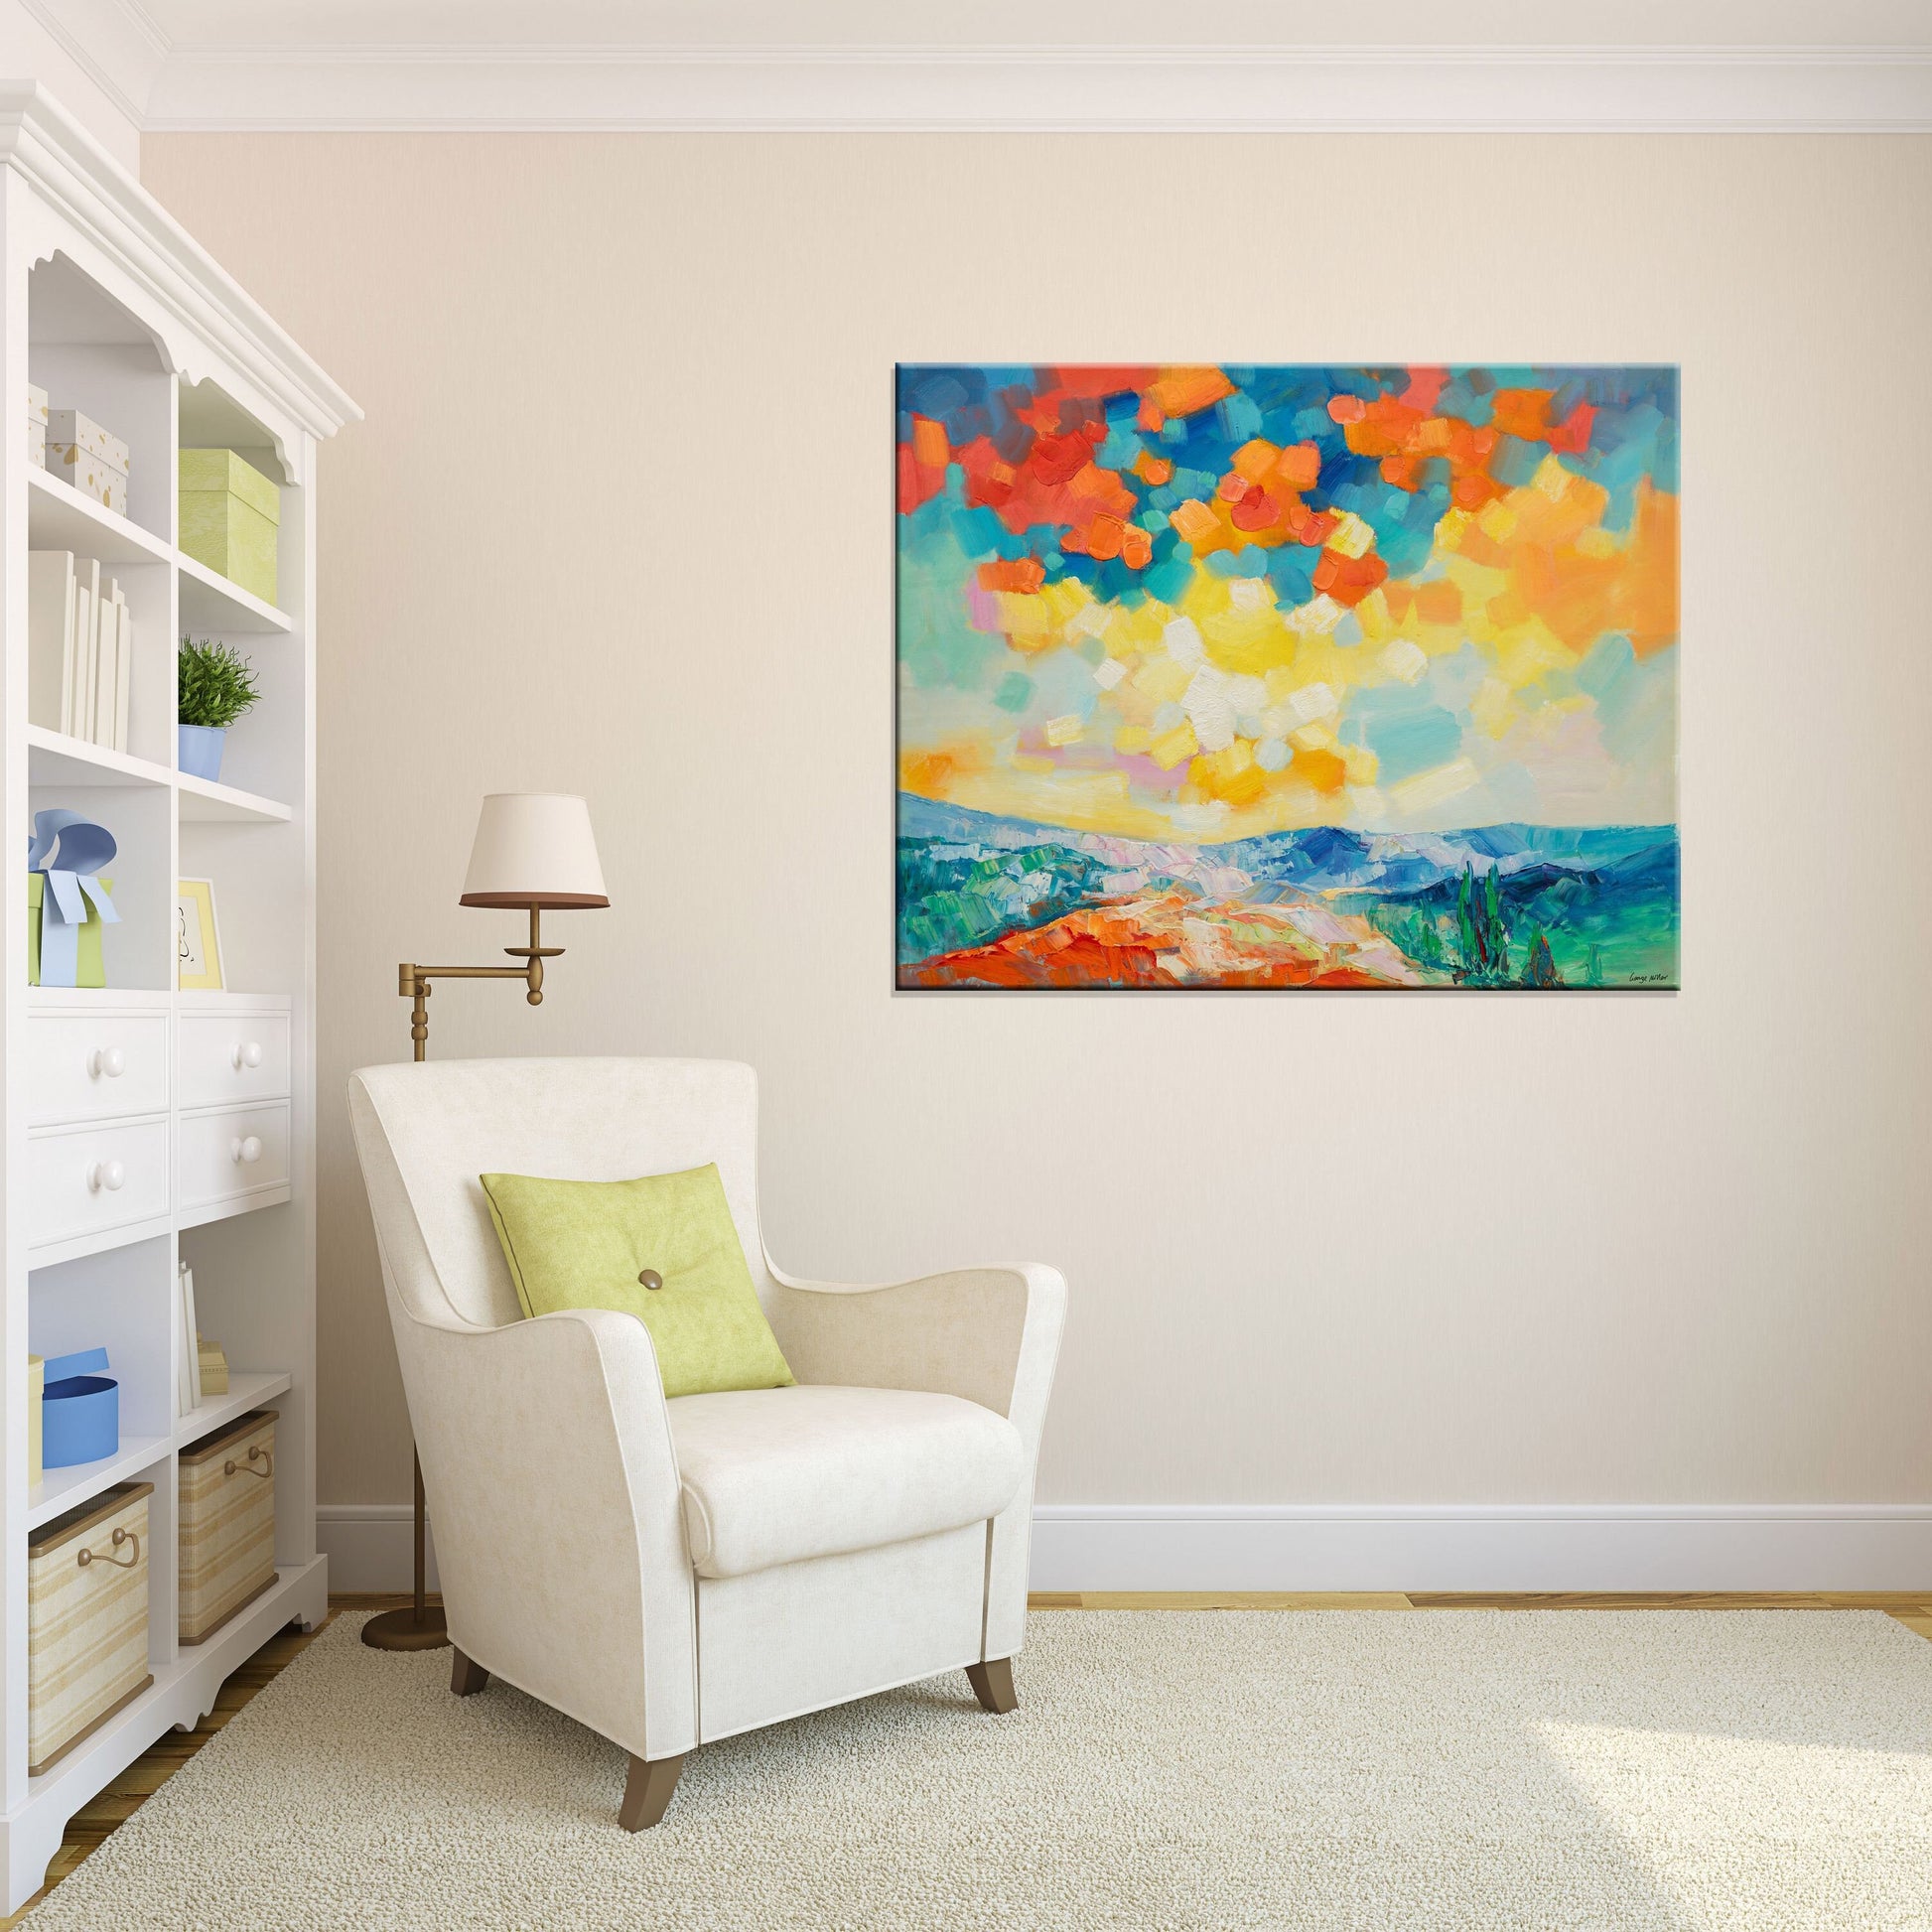 Abstract Landscape Oil Painting, Canvas Wall Art, An Original Abstract Landscape Oil Painting by George Miller